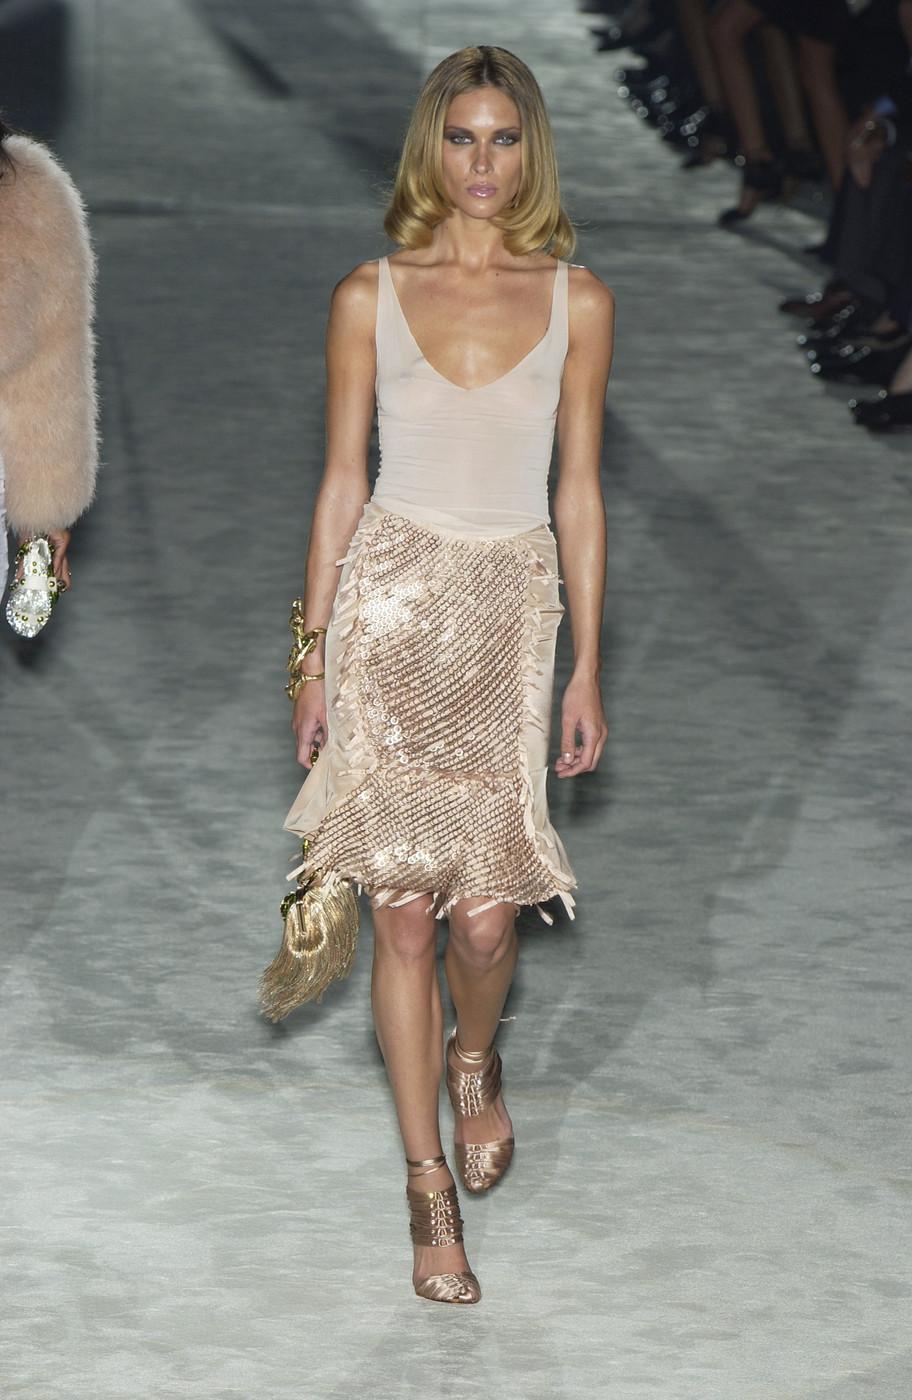 Tom Ford for Gucci Runway Sexy Semi Sheer Nude Silk Skirt
S/S 2004 Collection
Designer size 42
100% Stretch Silk, Very Unique Metal Rings Design Over the Net, Flirty Ribbons, Nude Color.
Measurements: Length - 20 inches at sides, 22